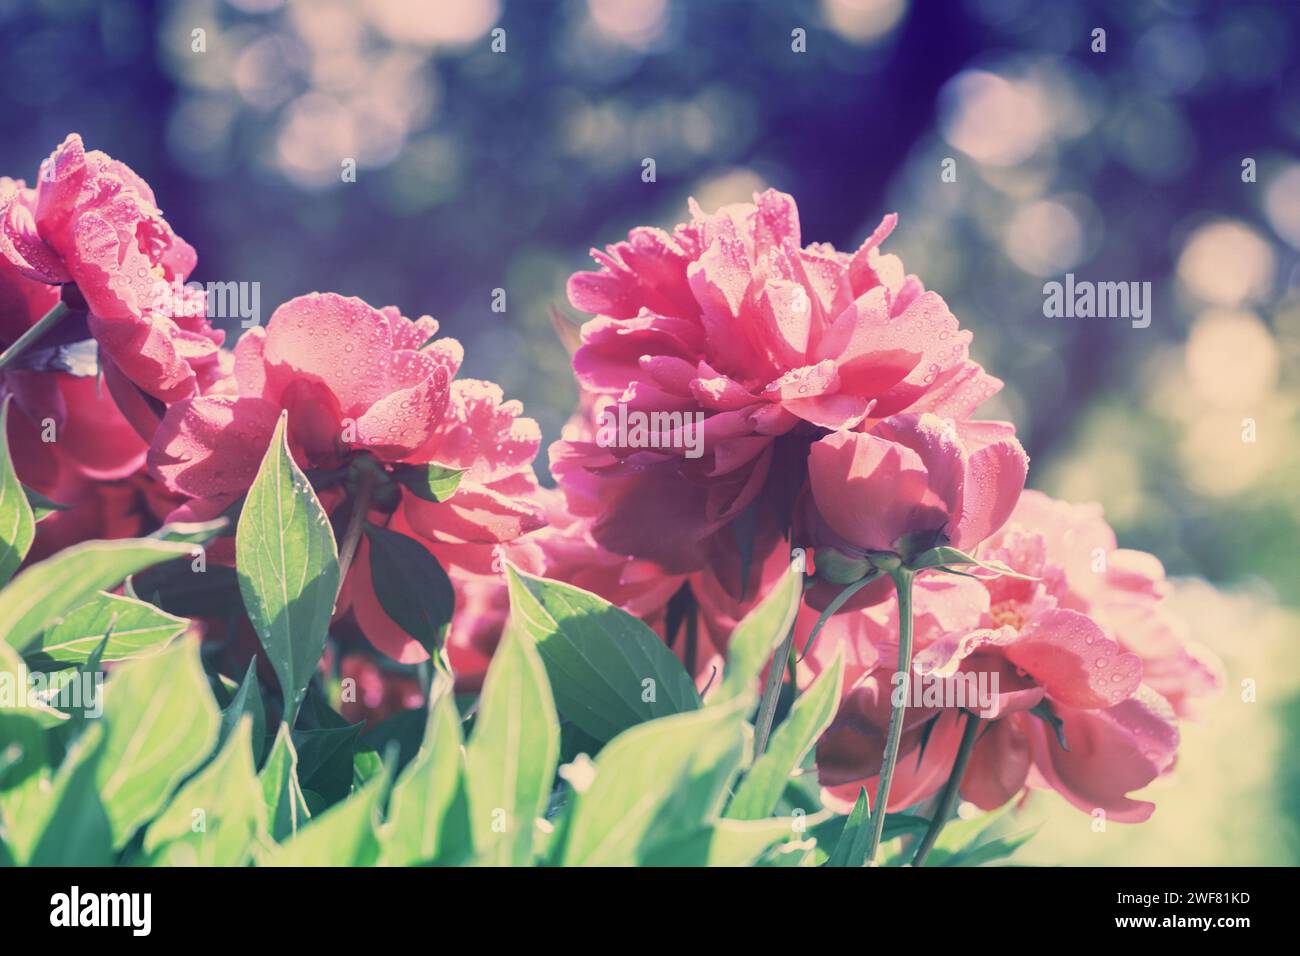 Vintage blooming peony flowers in the garden. Floral nature background Stock Photo